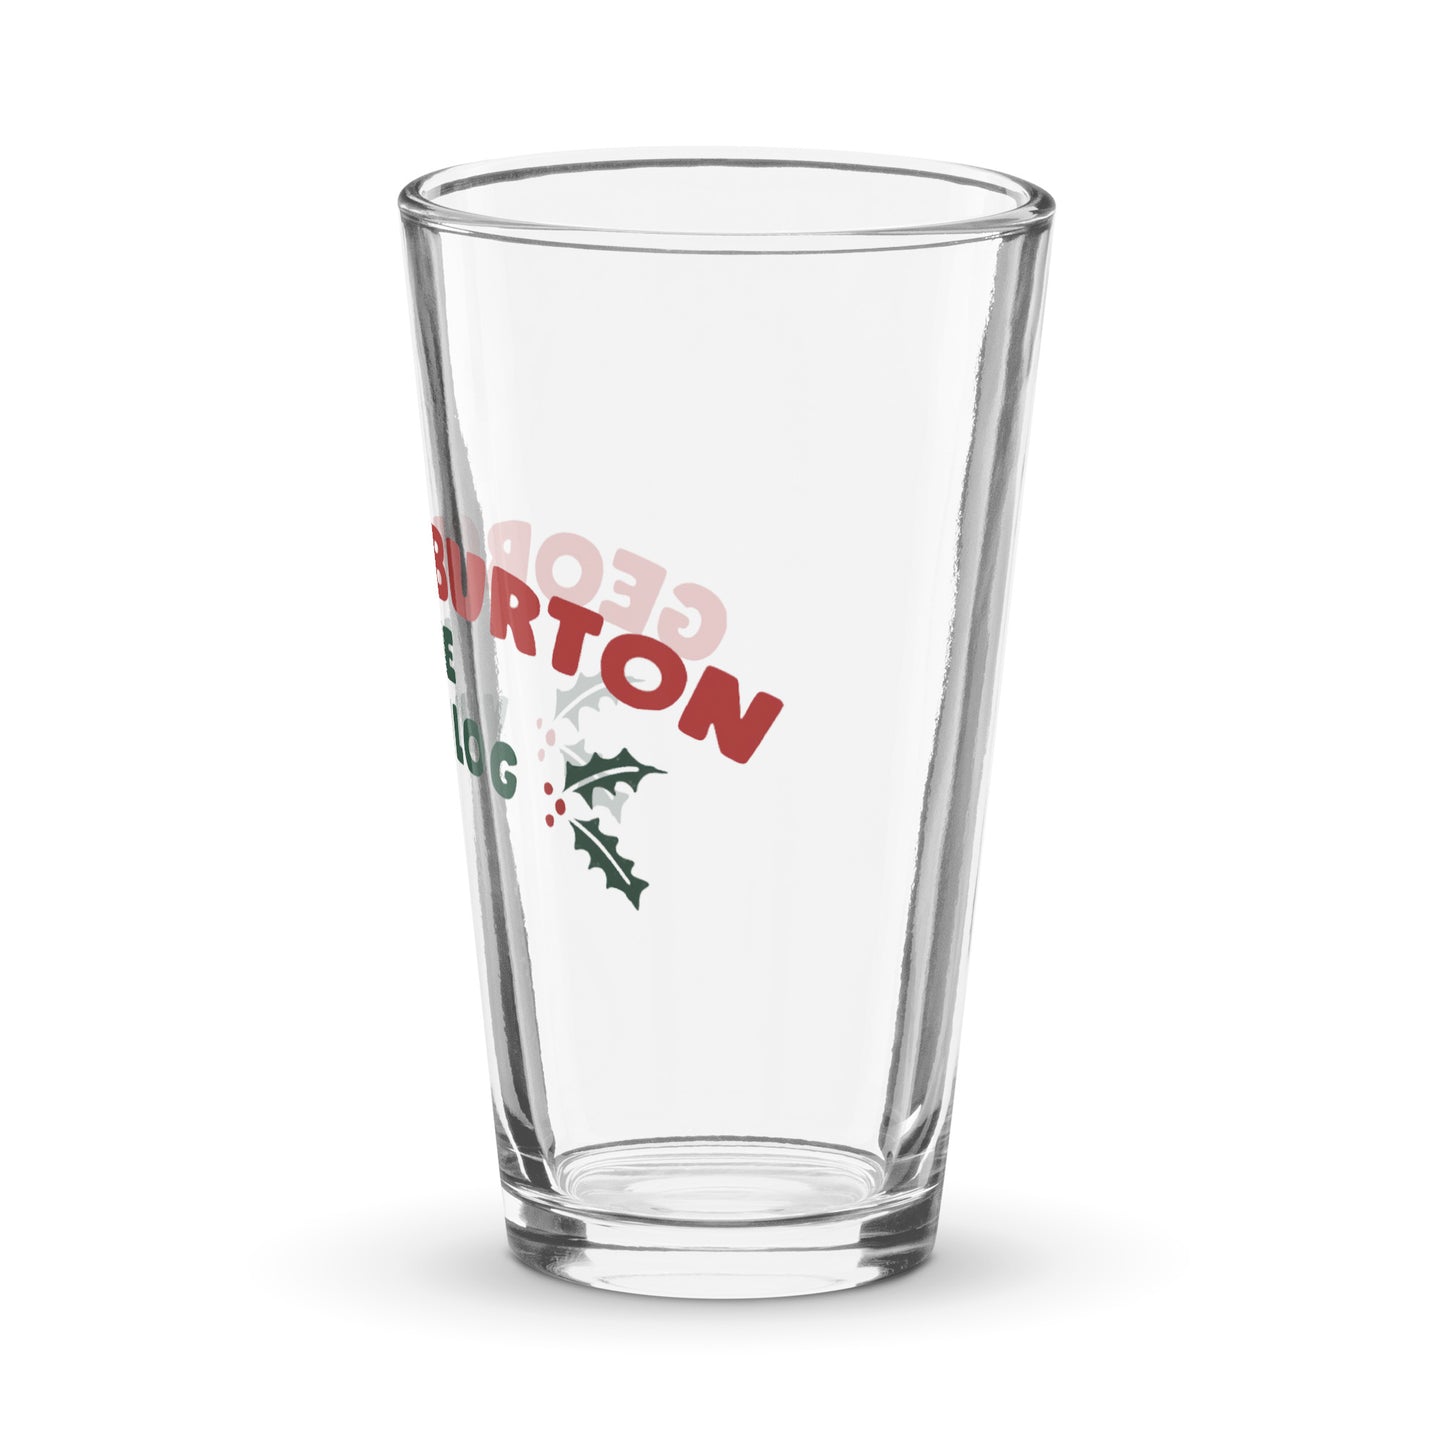 "GB Holiday" Pint Glass